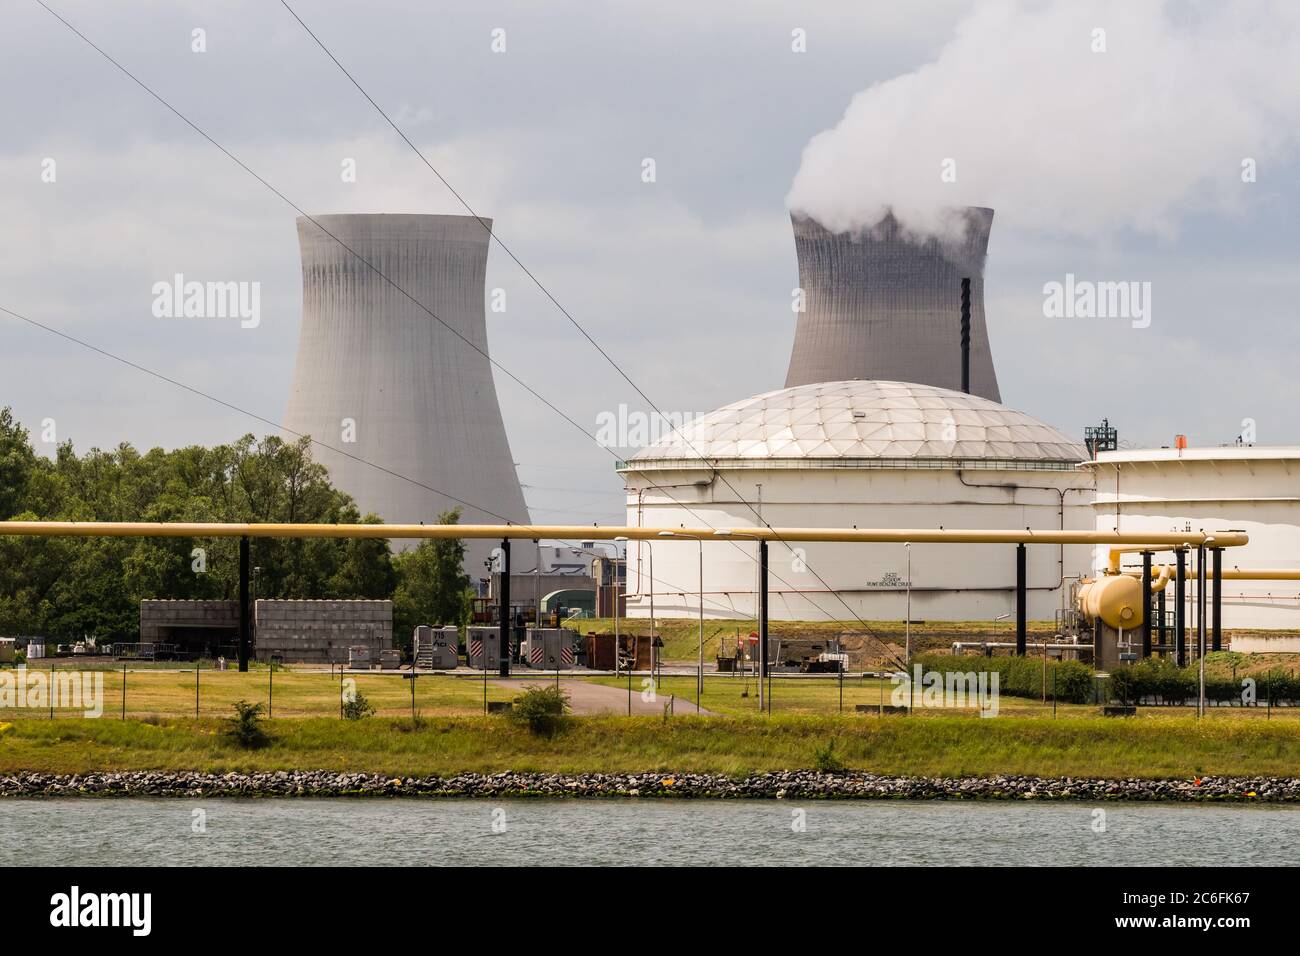 Antwerp, Belgium - June 8th, 2019: View over some petrochemical industry installations in the port of Antwerp to the Nuclear Power Plant Doel Stock Photo